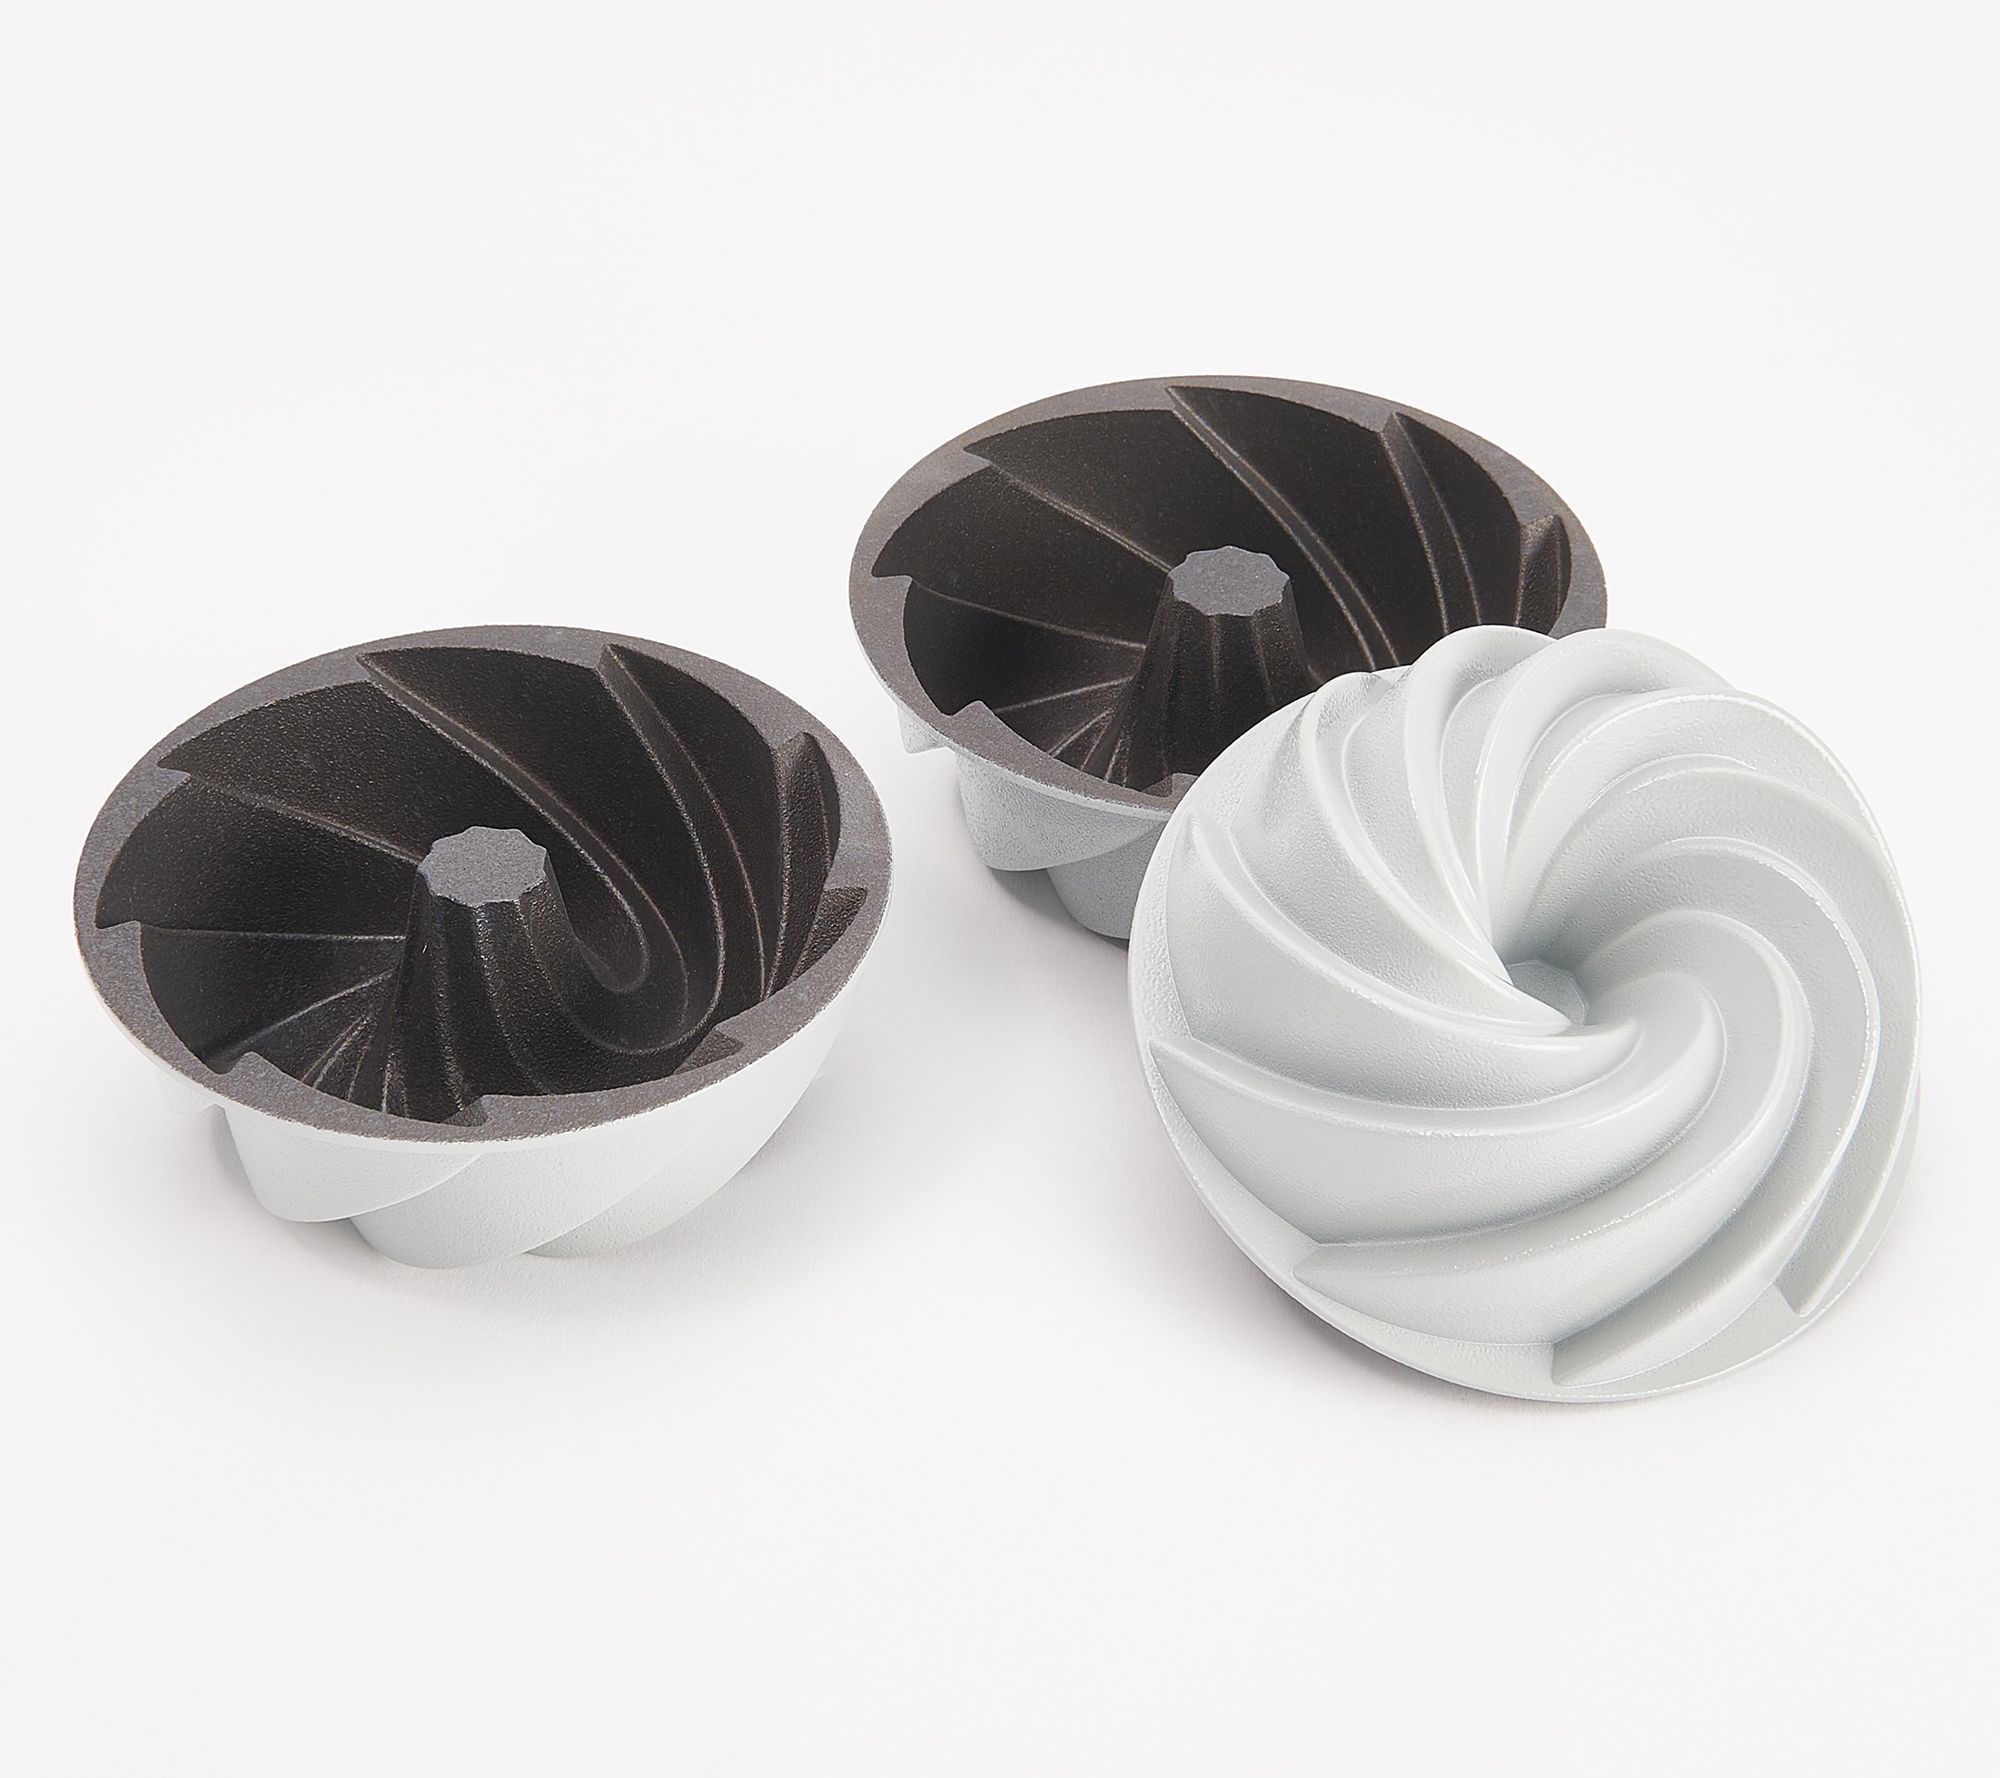 Fluted Bundt Cake Pan - 0 Cup Capacity - 8 1/4 x 3 7/8